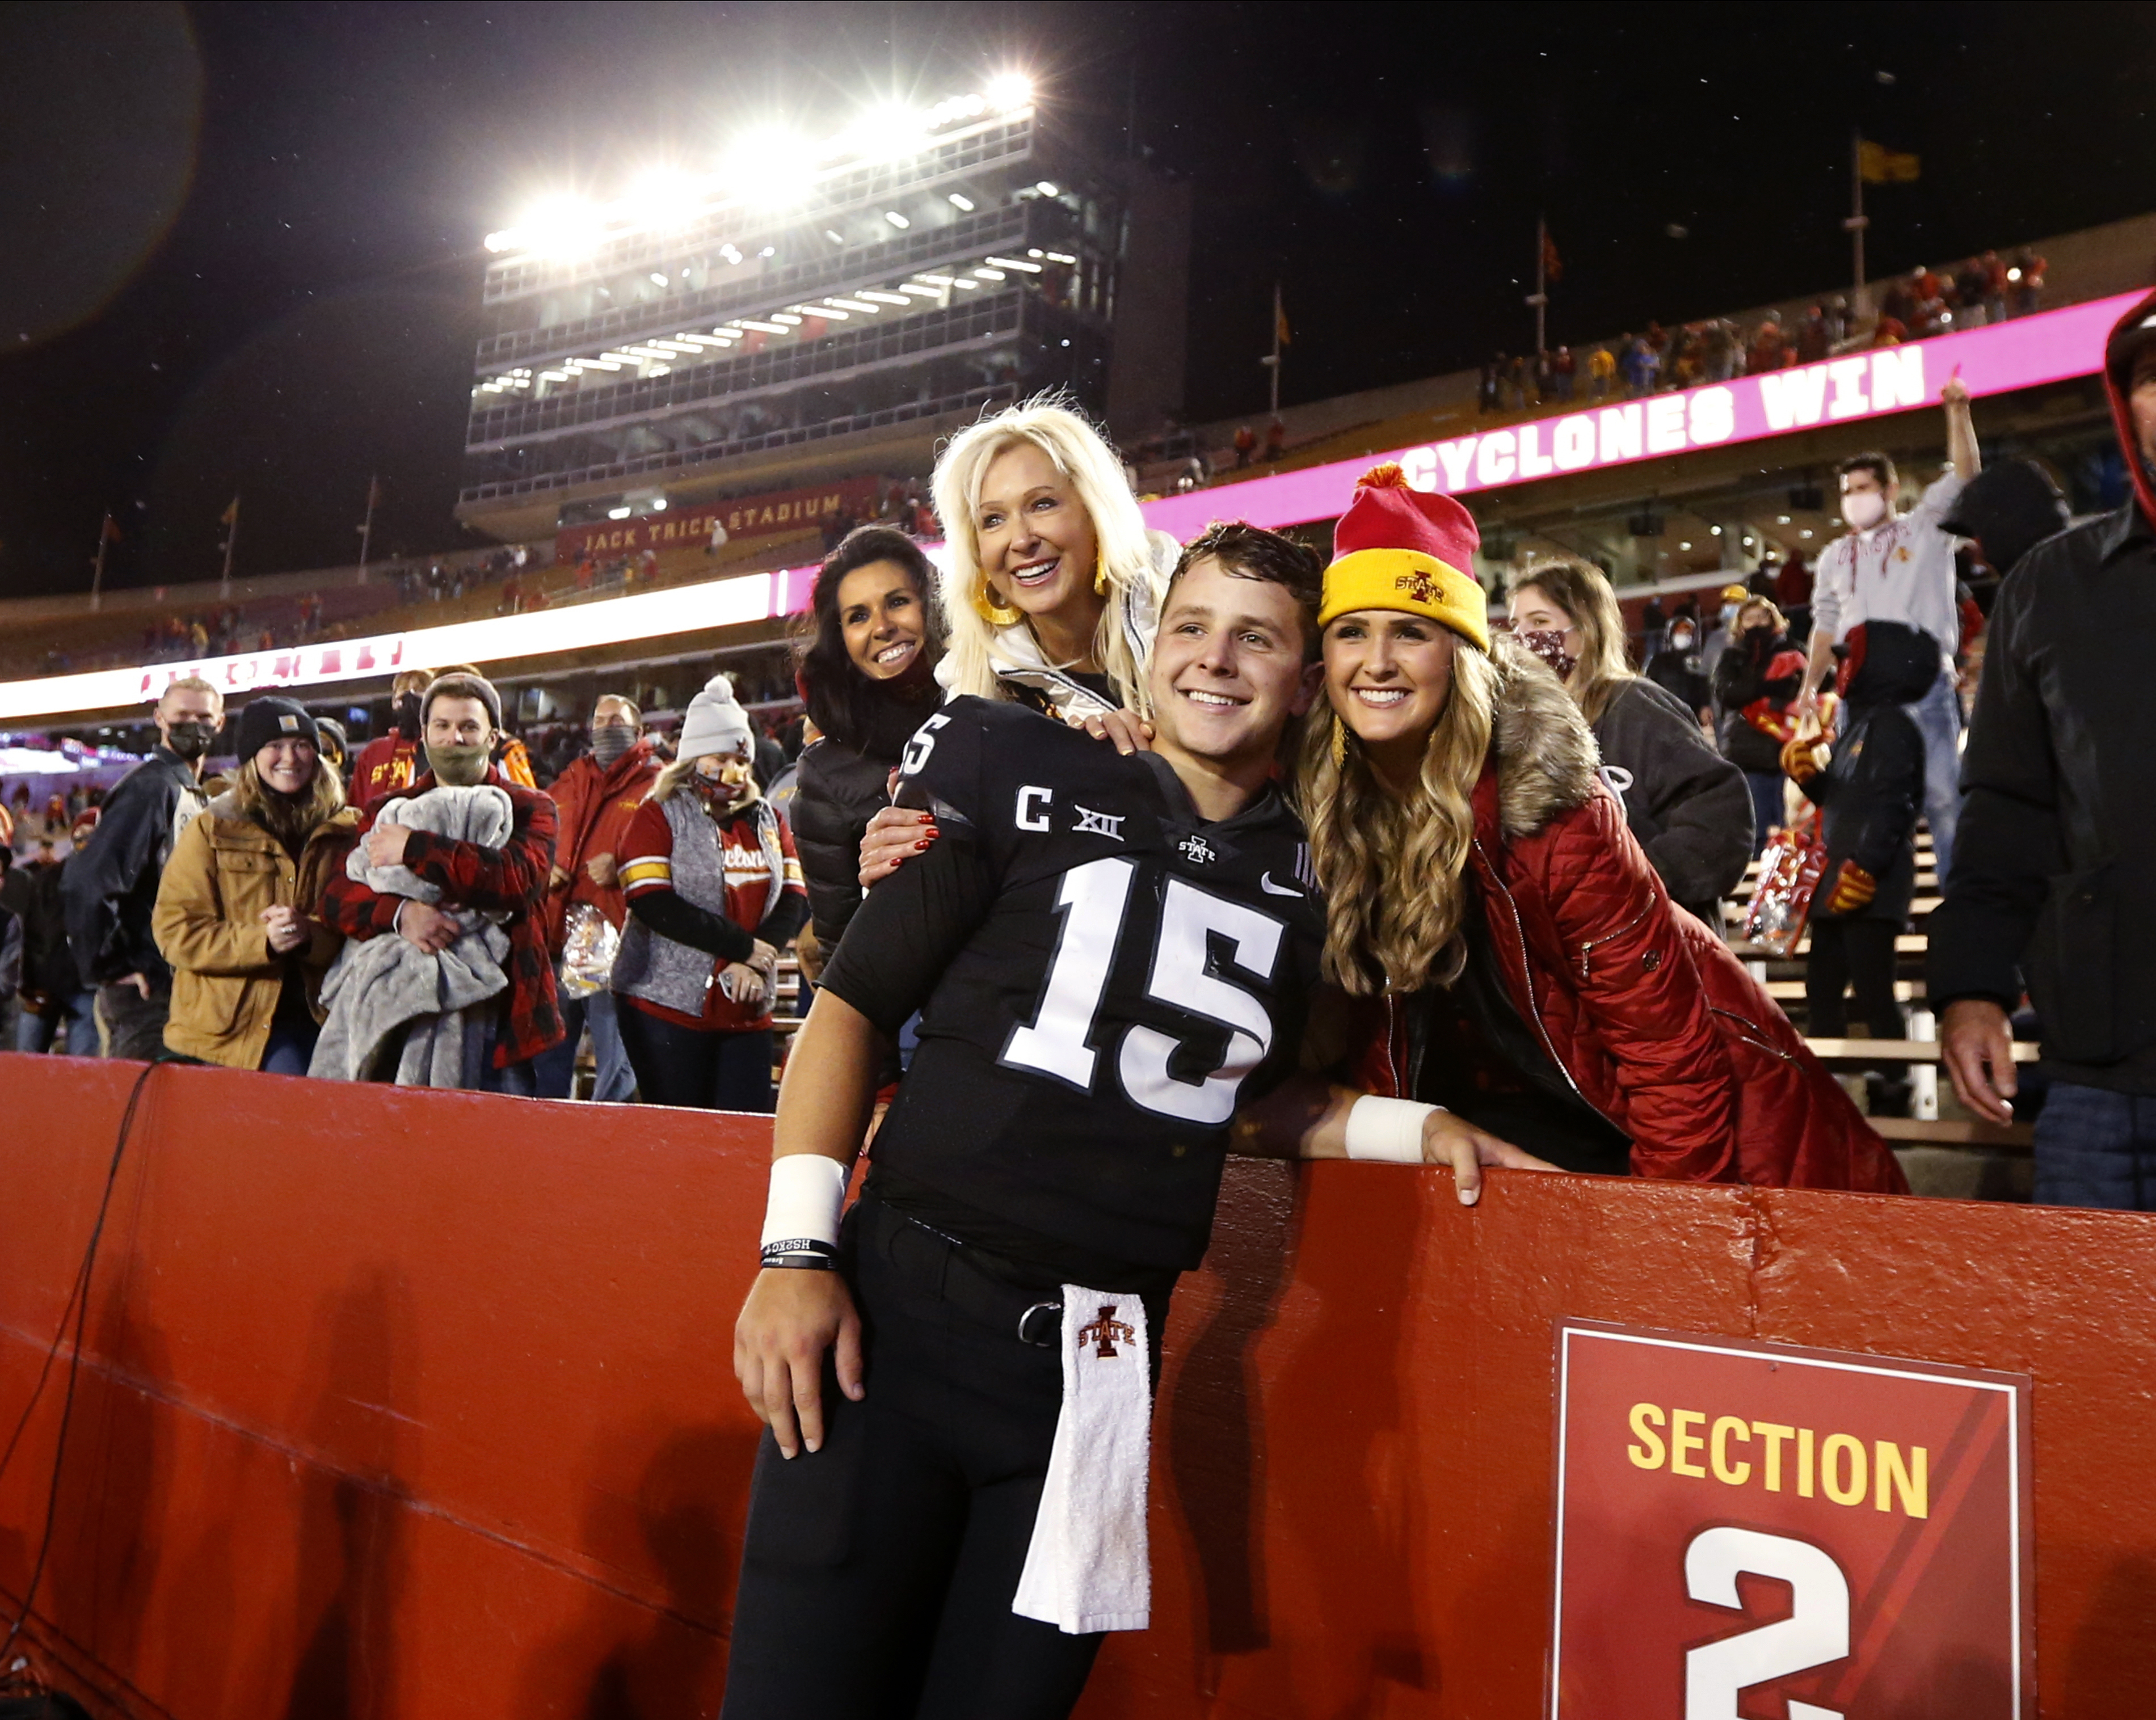 Brock Purdy with his mother Carrie Purdy, and sister Whitney Purdy at Jack Trice Stadium on October 3, 2020, in Ames, Iowa. | Source: Getty Images